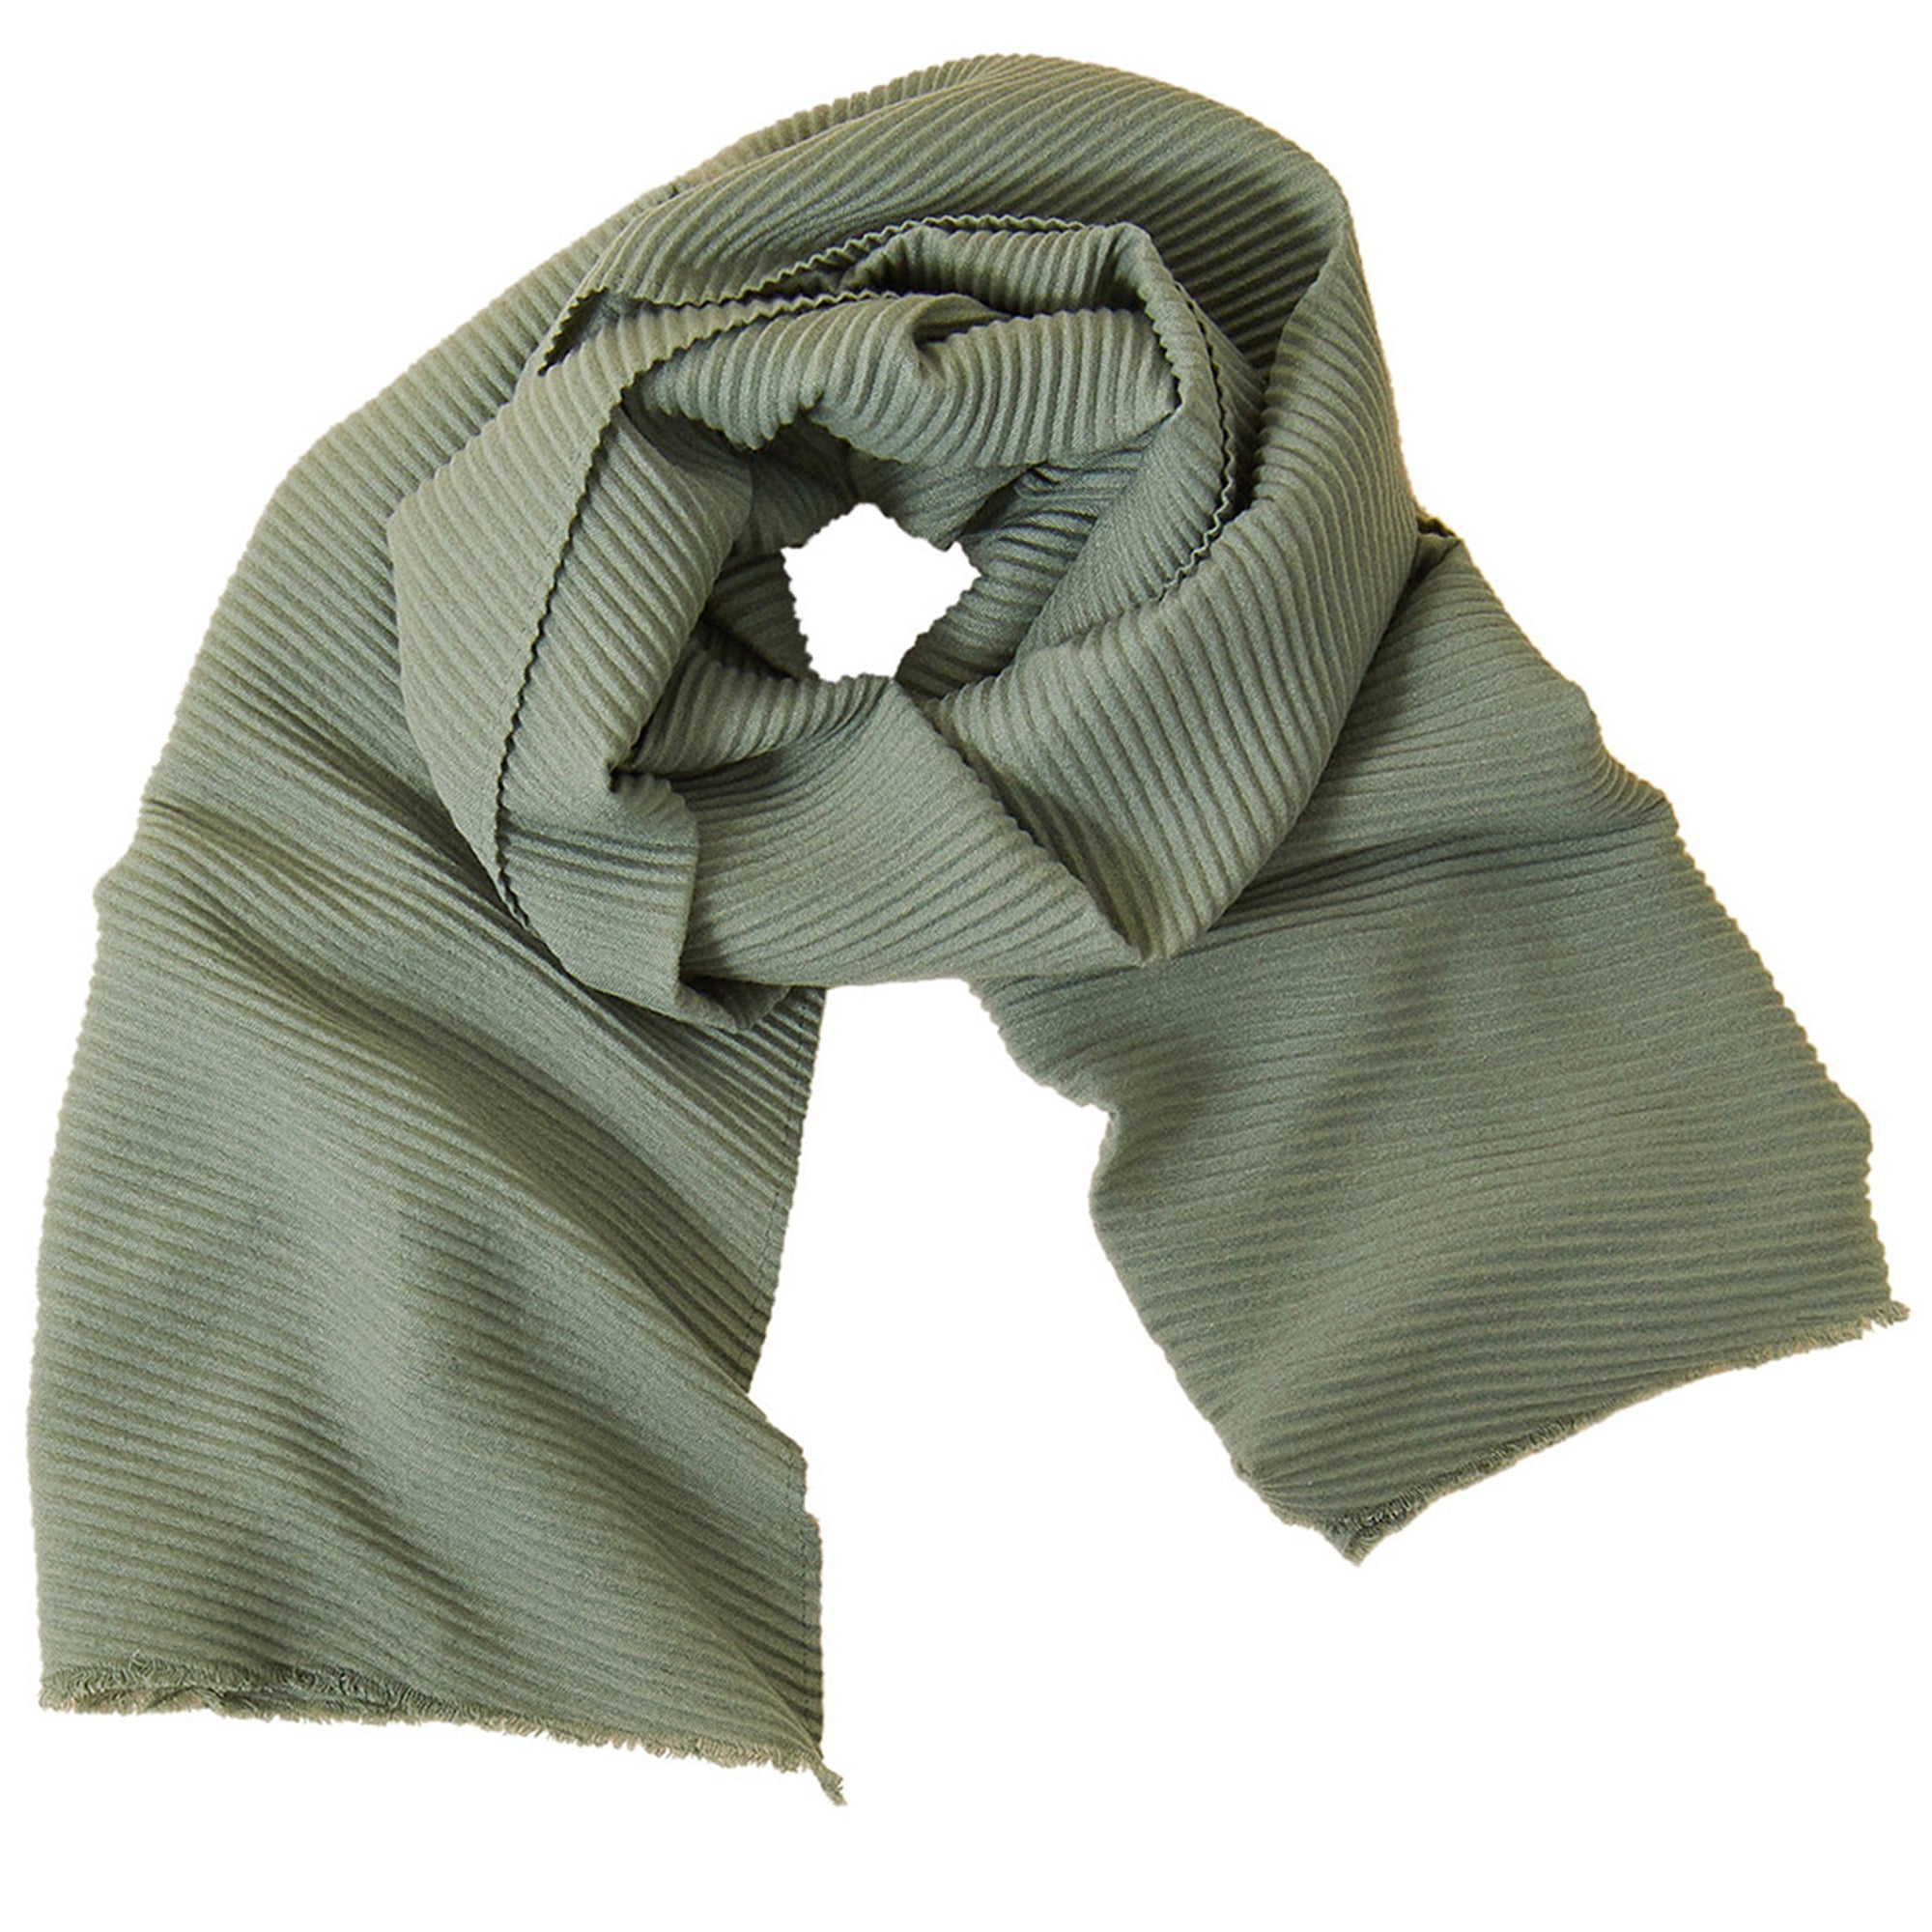 Accessorize London Women's Green Ribbed Blanket Scarf